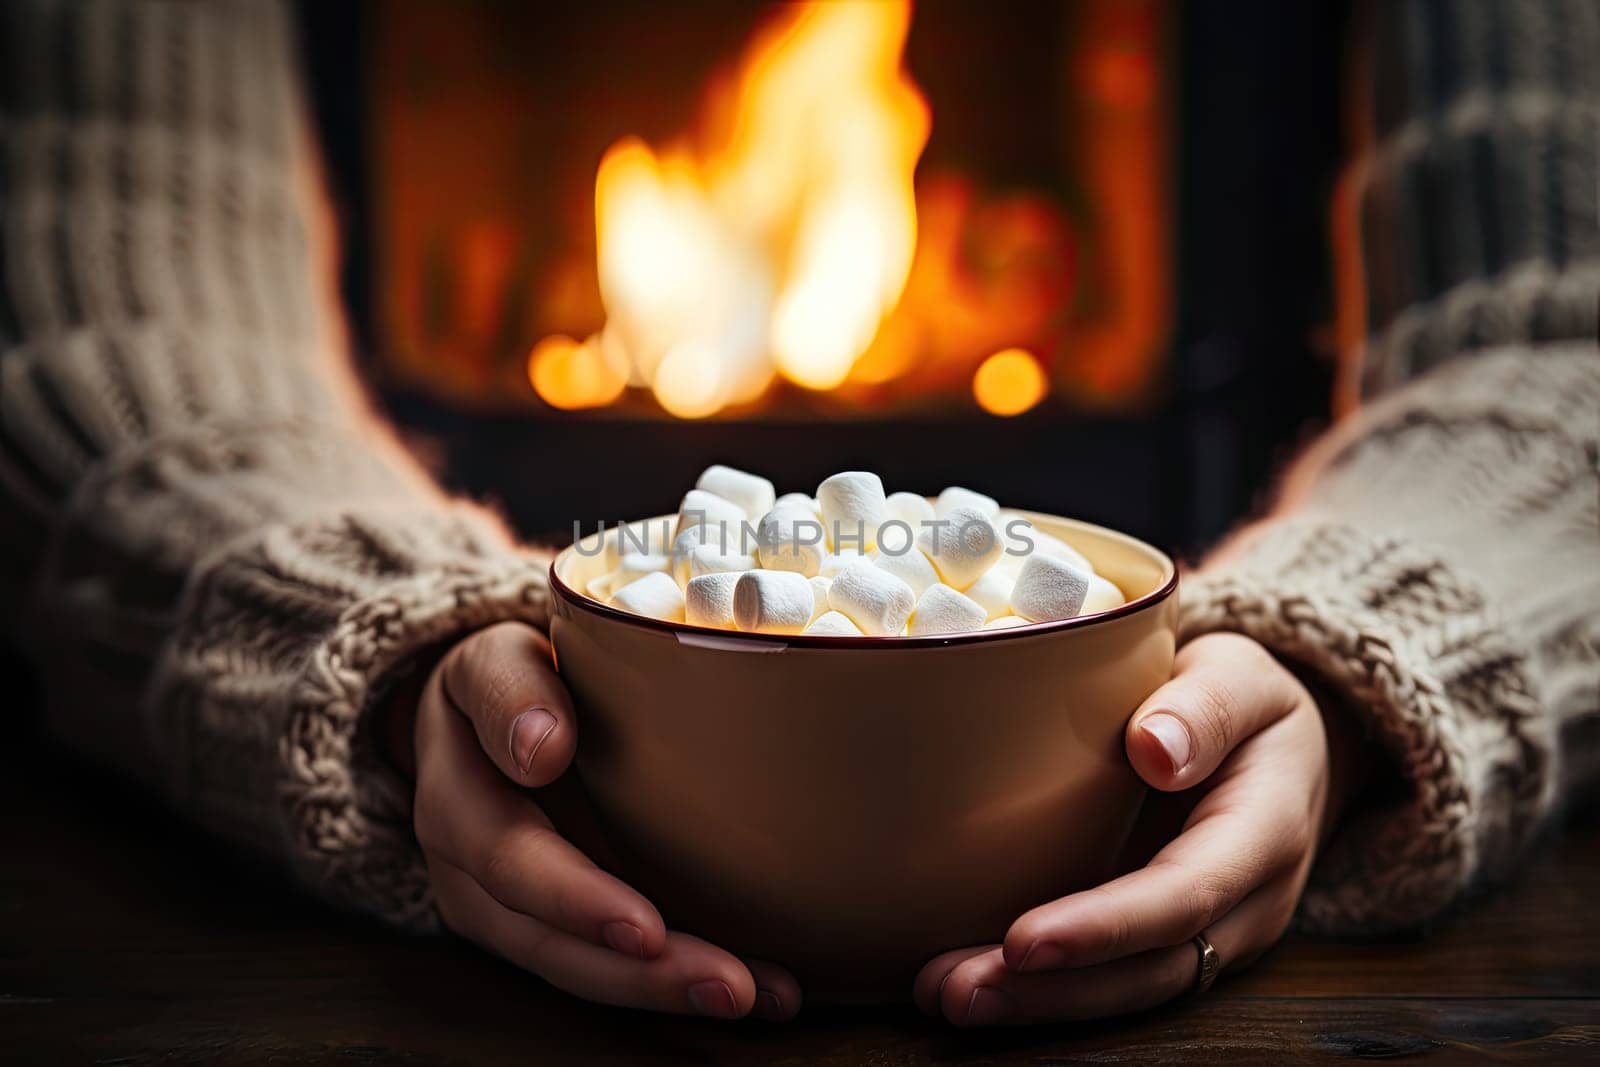 A person holding a bowl of marshmallows in front of a fire by golibtolibov